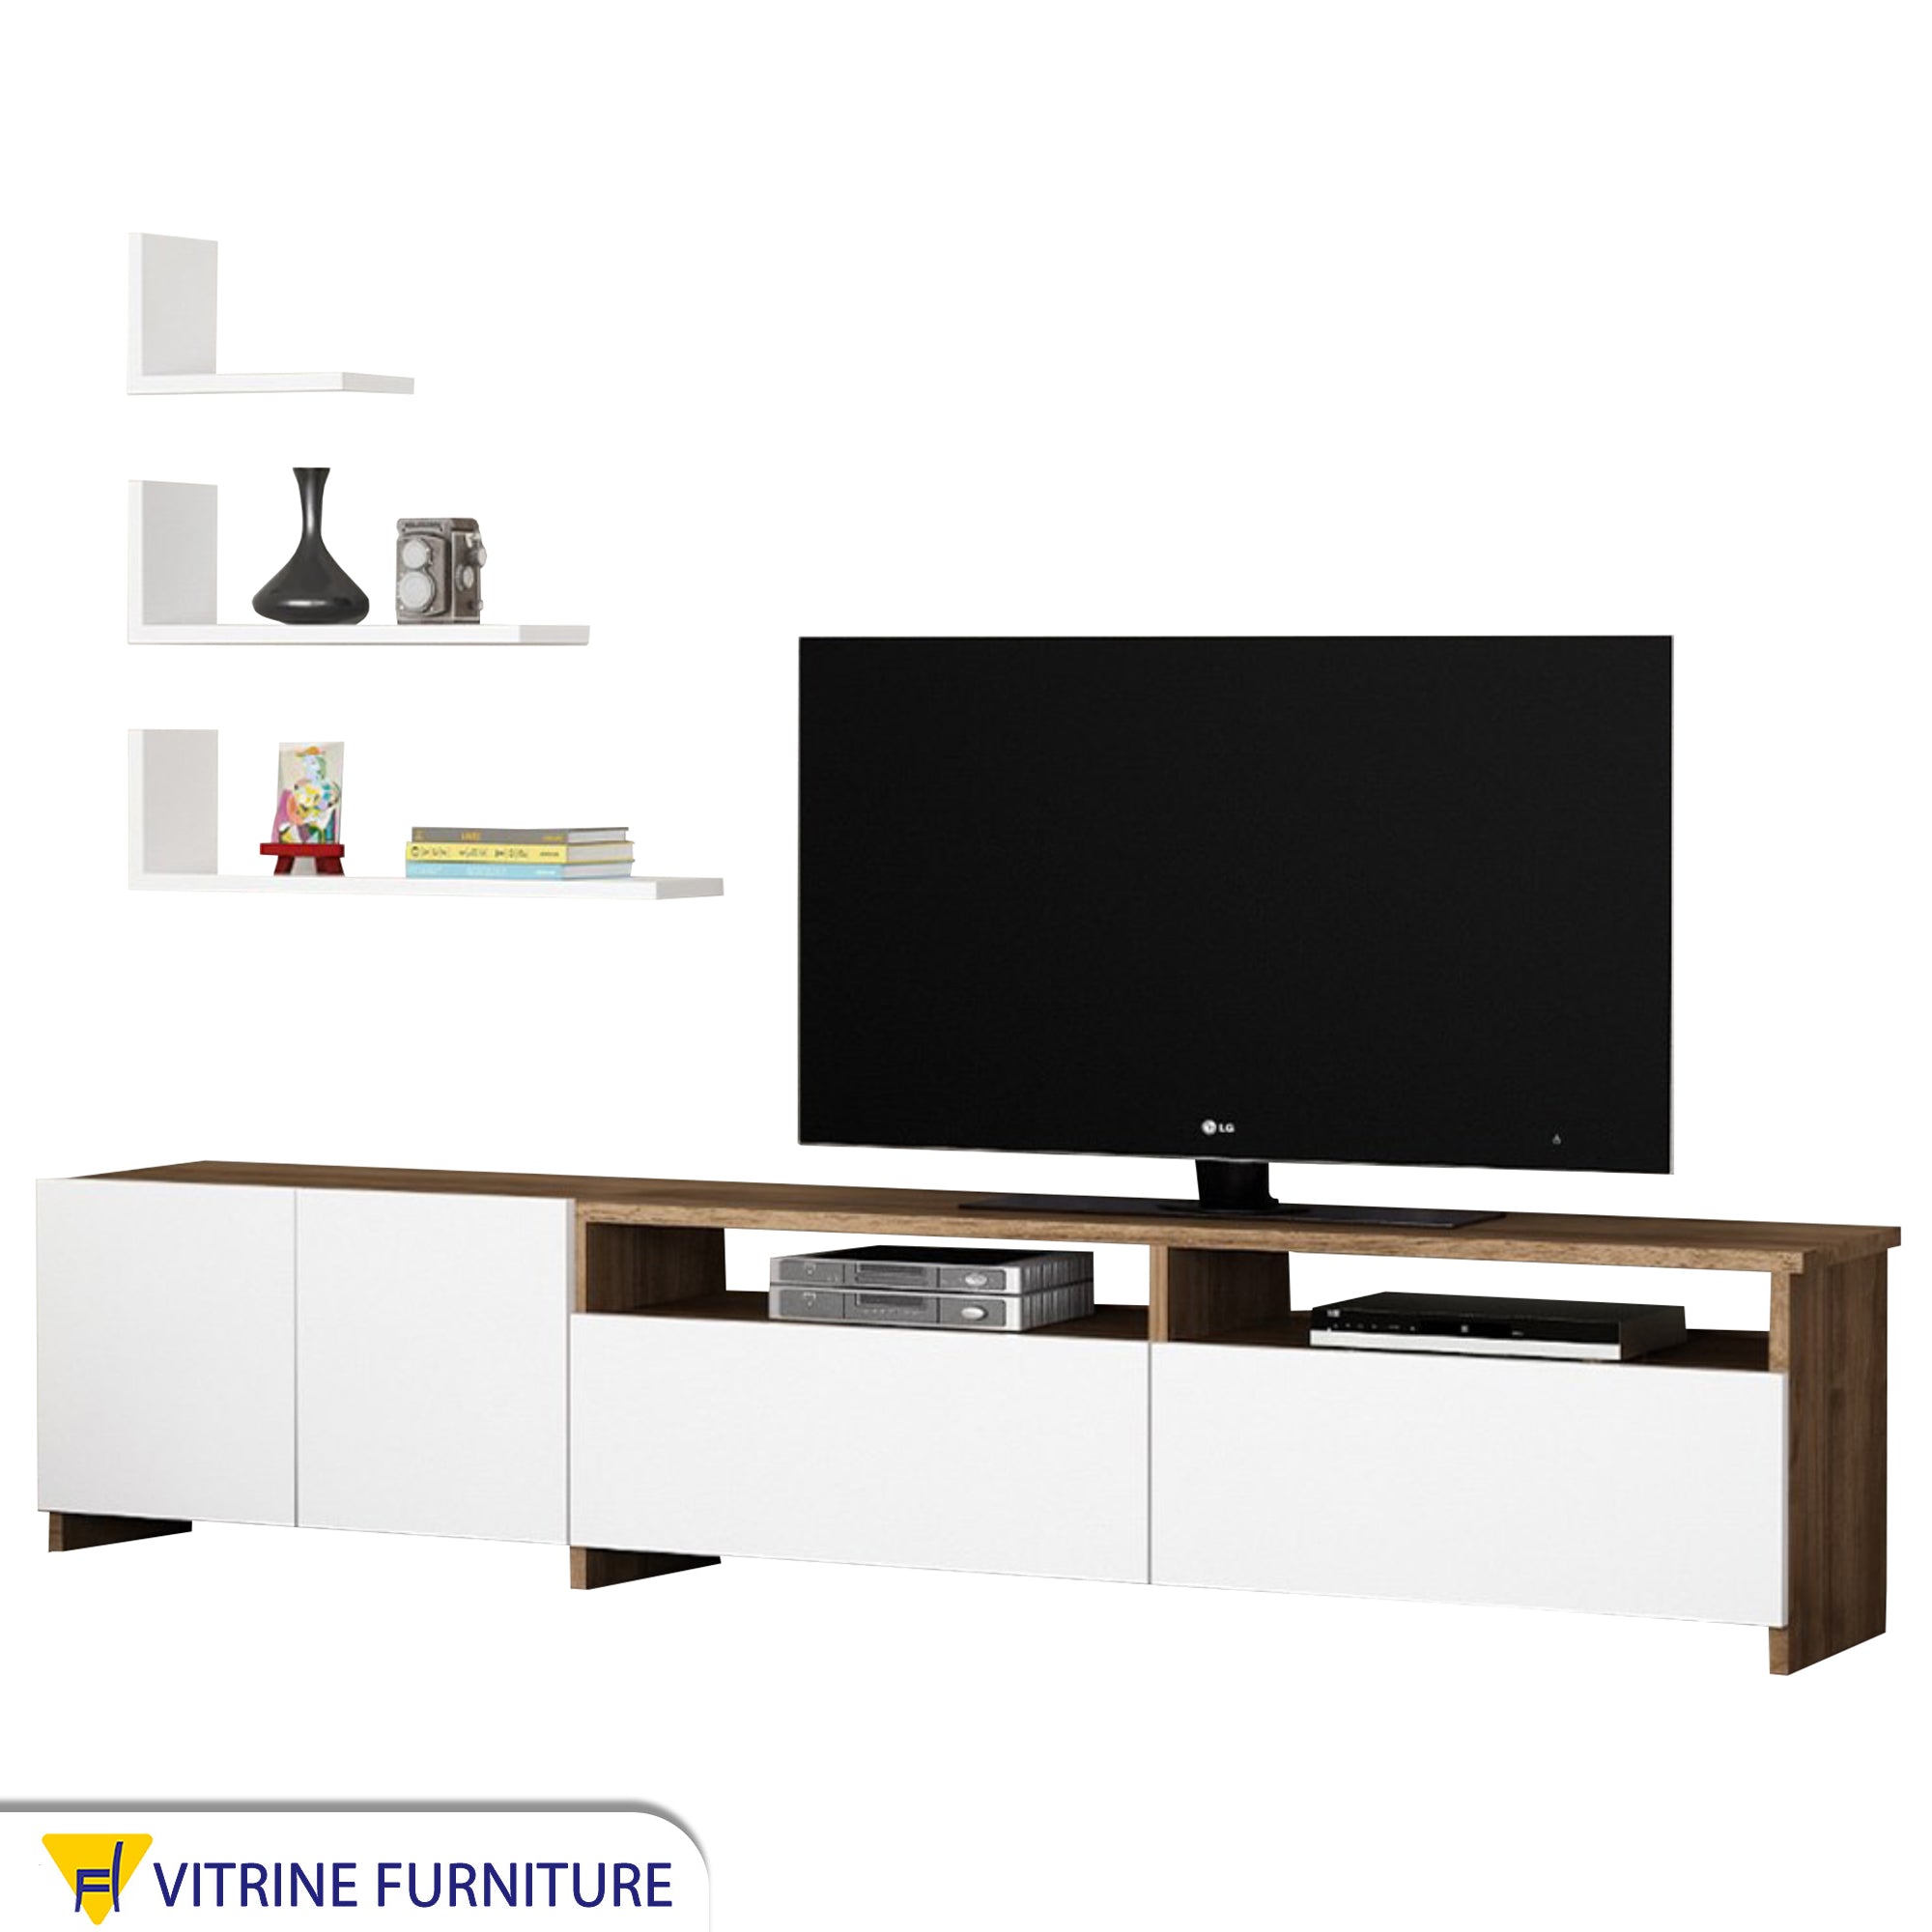 Television unit with three wall shelves